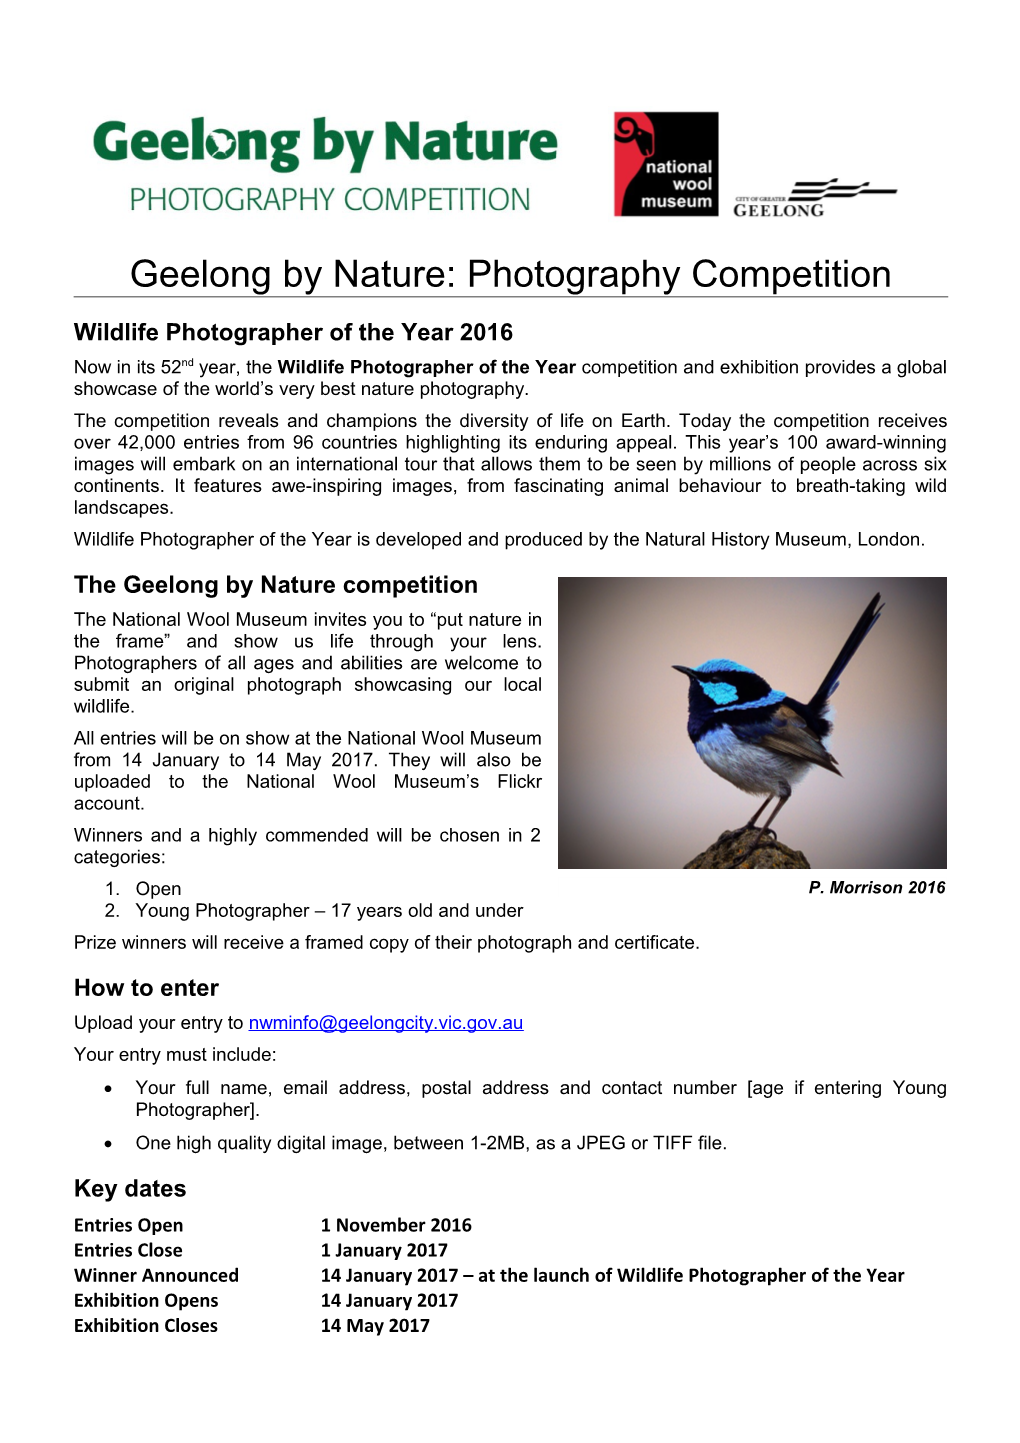 Geelong by Nature: Photography Competition